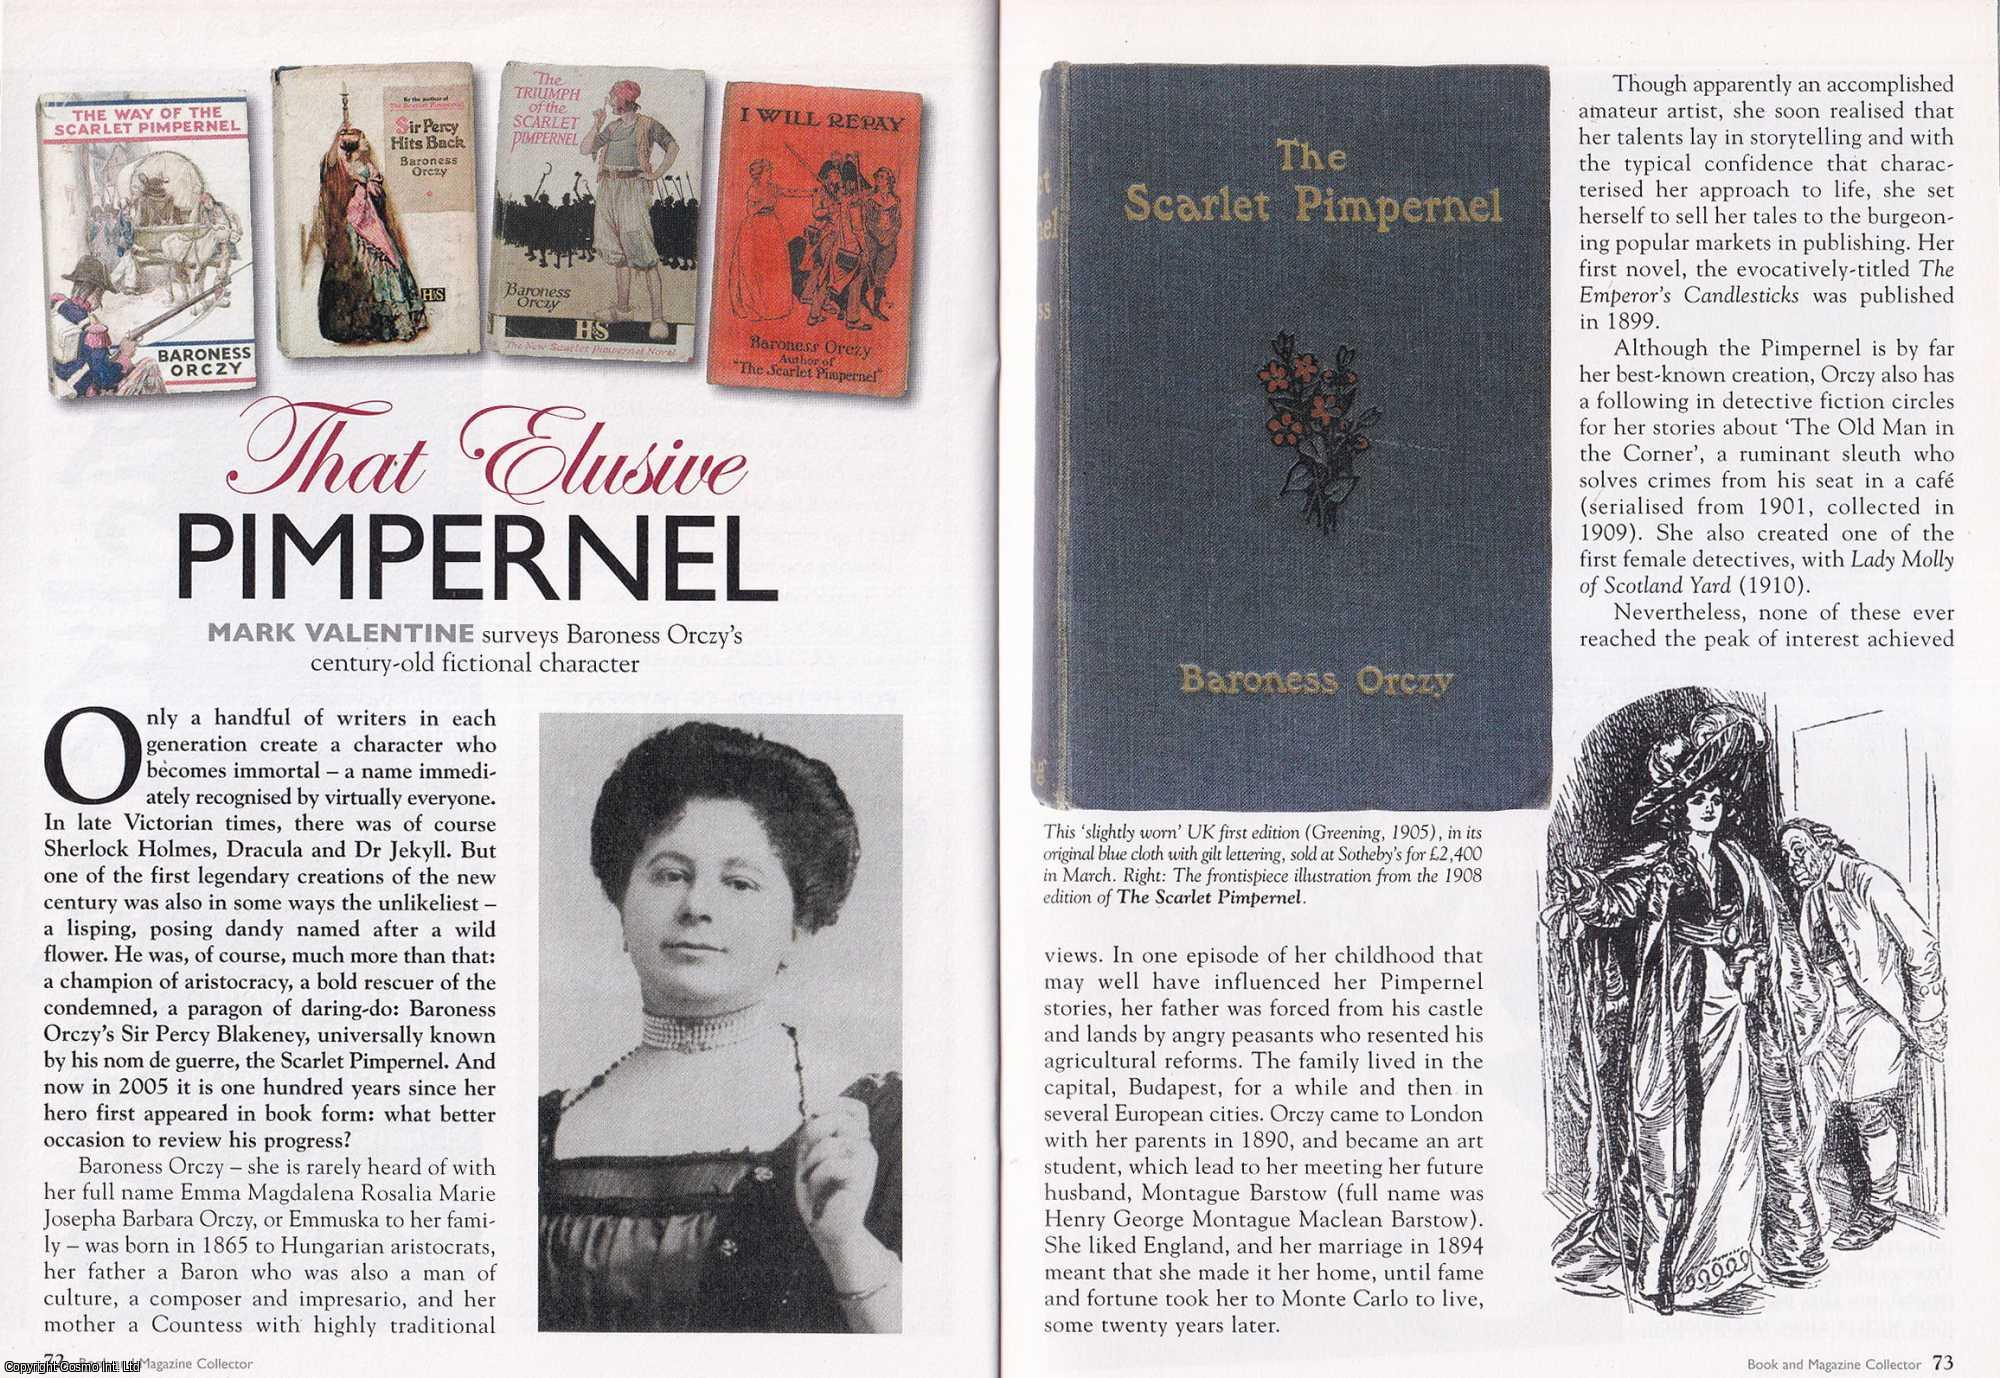 Mark Valentine - That Elusive Pimpernel. Surveying Baroness Orczy's Century Old Fictional Character. This is an original article separated from an issue of The Book & Magazine Collector publication.